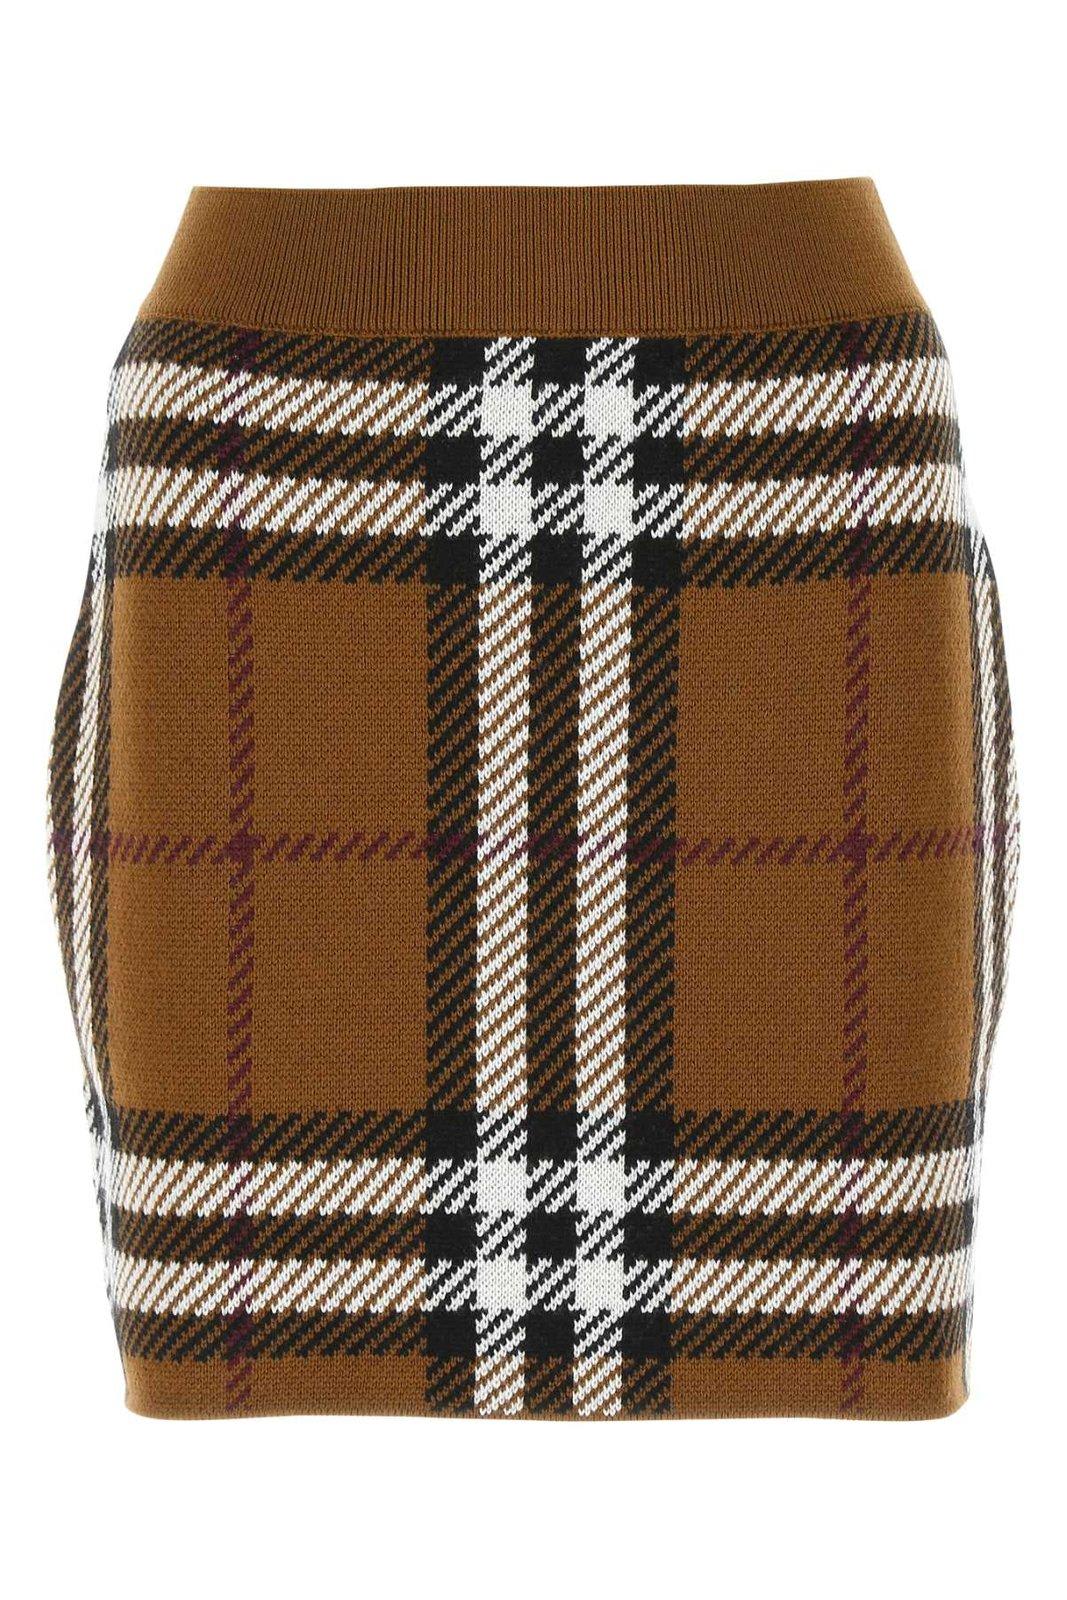 BURBERRY EXAGGERATED CHECK PATTERN MINI SKIRT